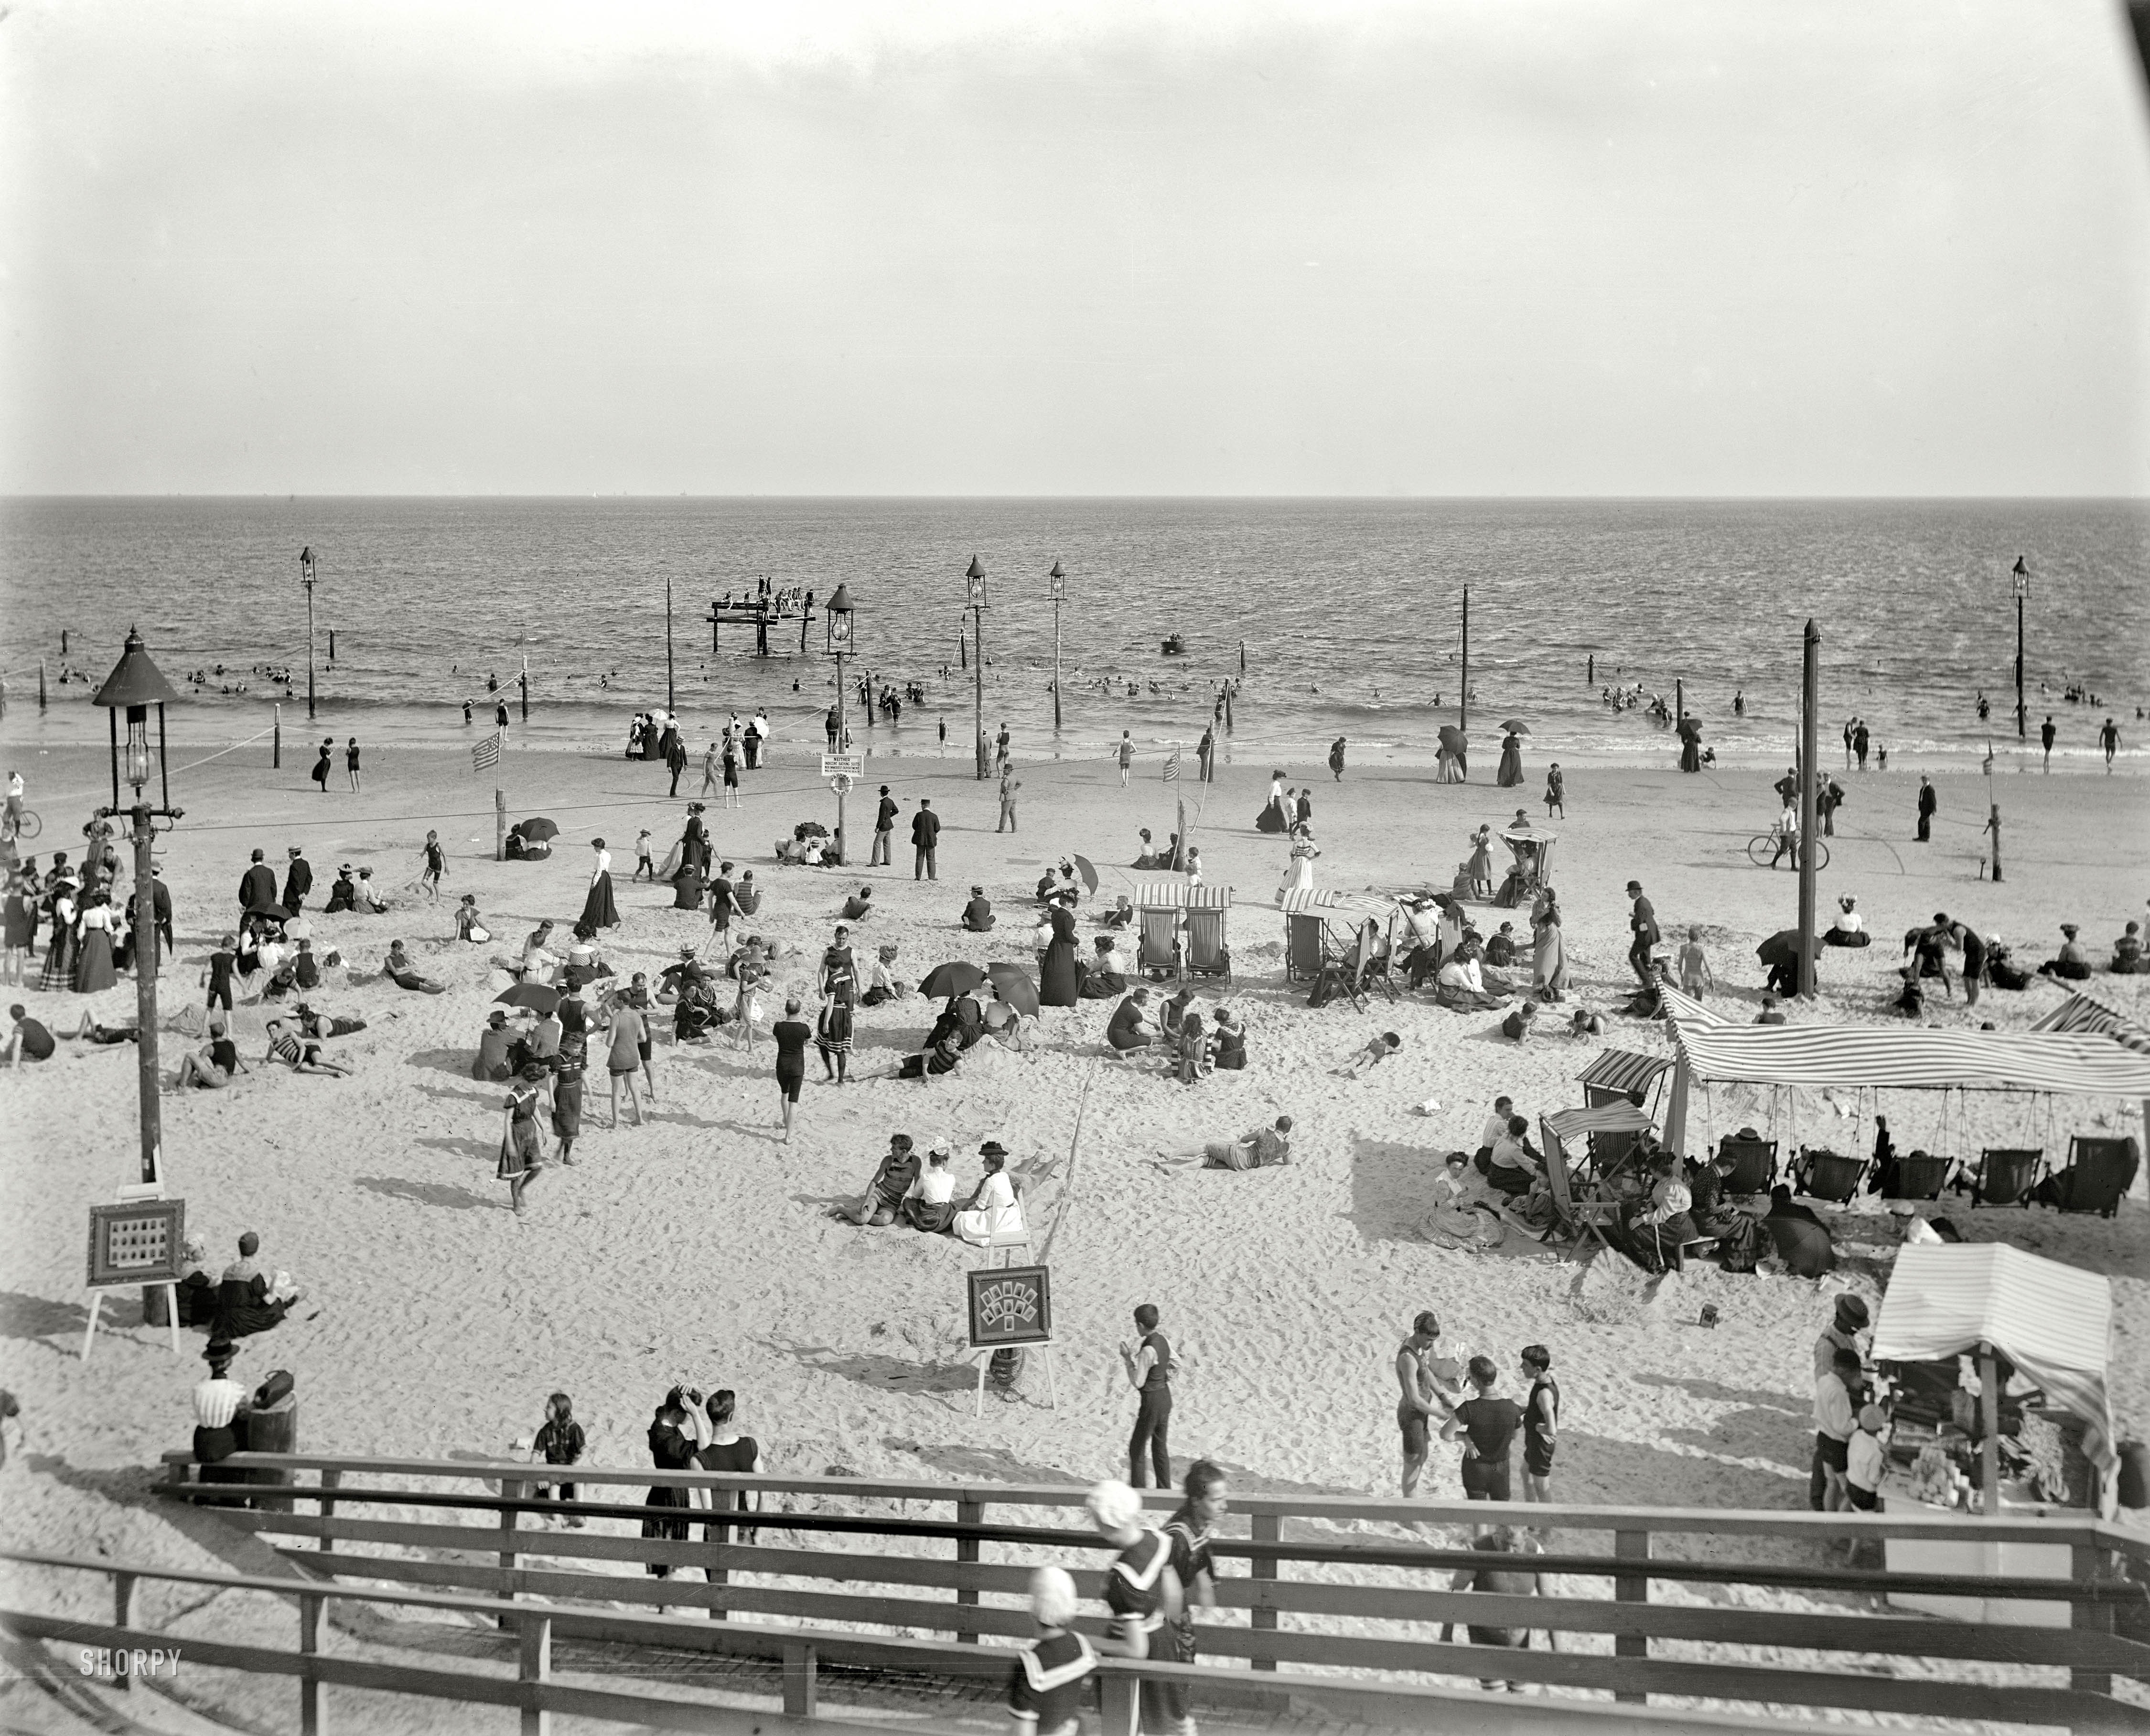 Brooklyn, New York, circa 1901. "Brighton Beach." Where, as noted on the sign, "Neither indecent bathing suits nor immodest deportment will be tolerated." 8x10 inch dry plate glass negative, Detroit Publishing Company. View full size.